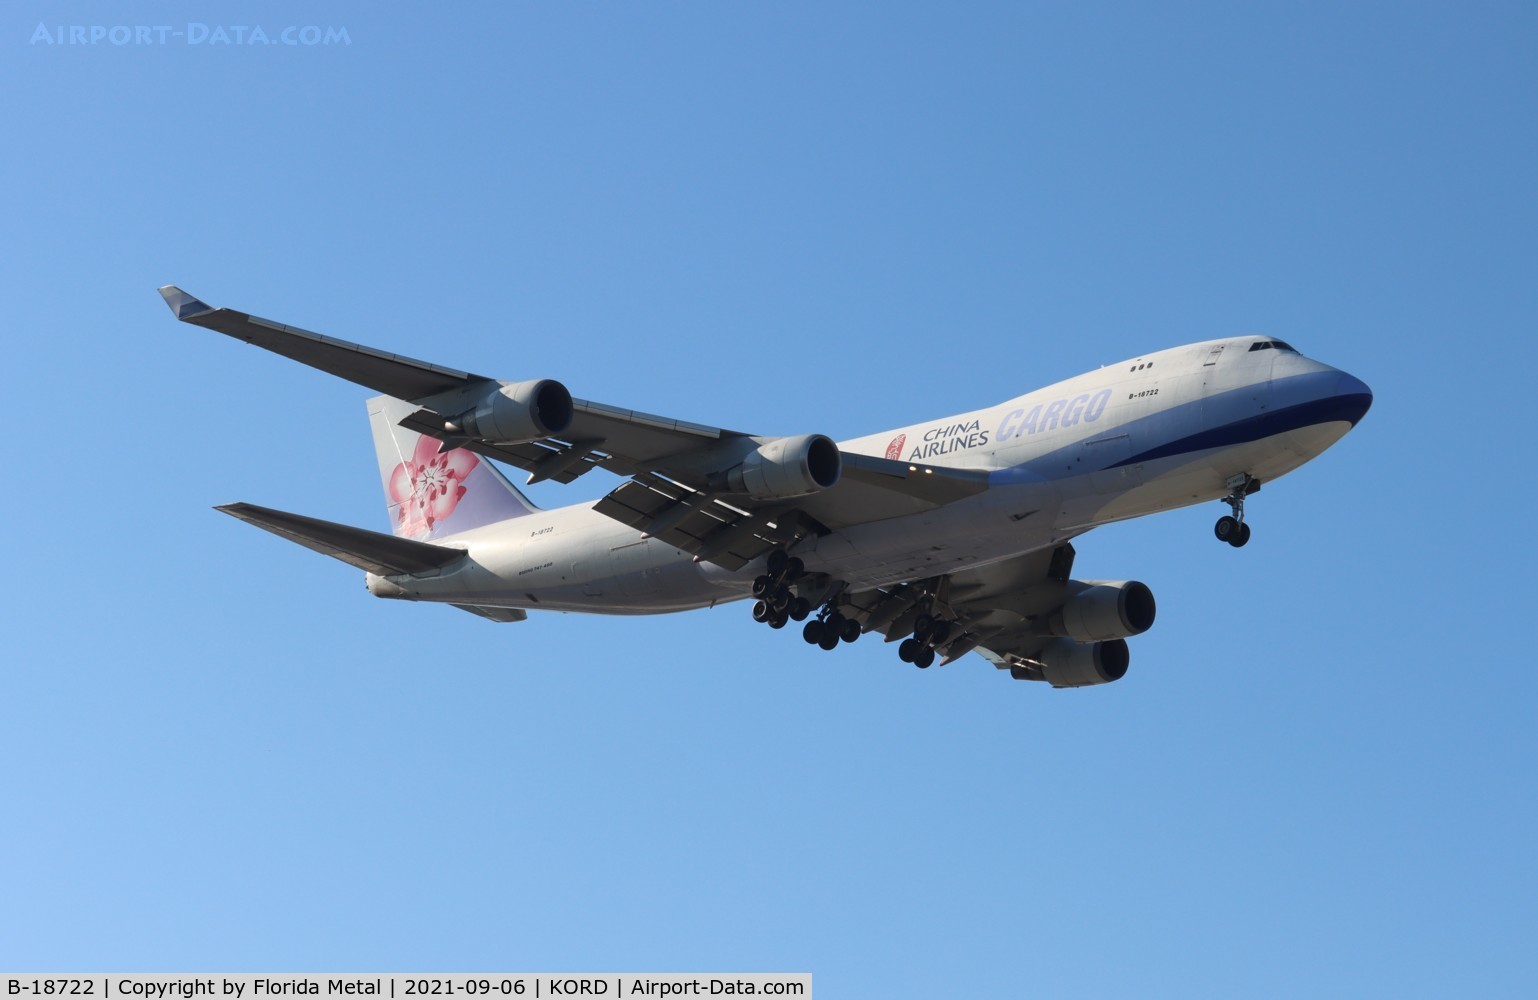 B-18722, 2006 Boeing 747-409F/SCD C/N 34265, China Airlines Cargo 747-400F zx